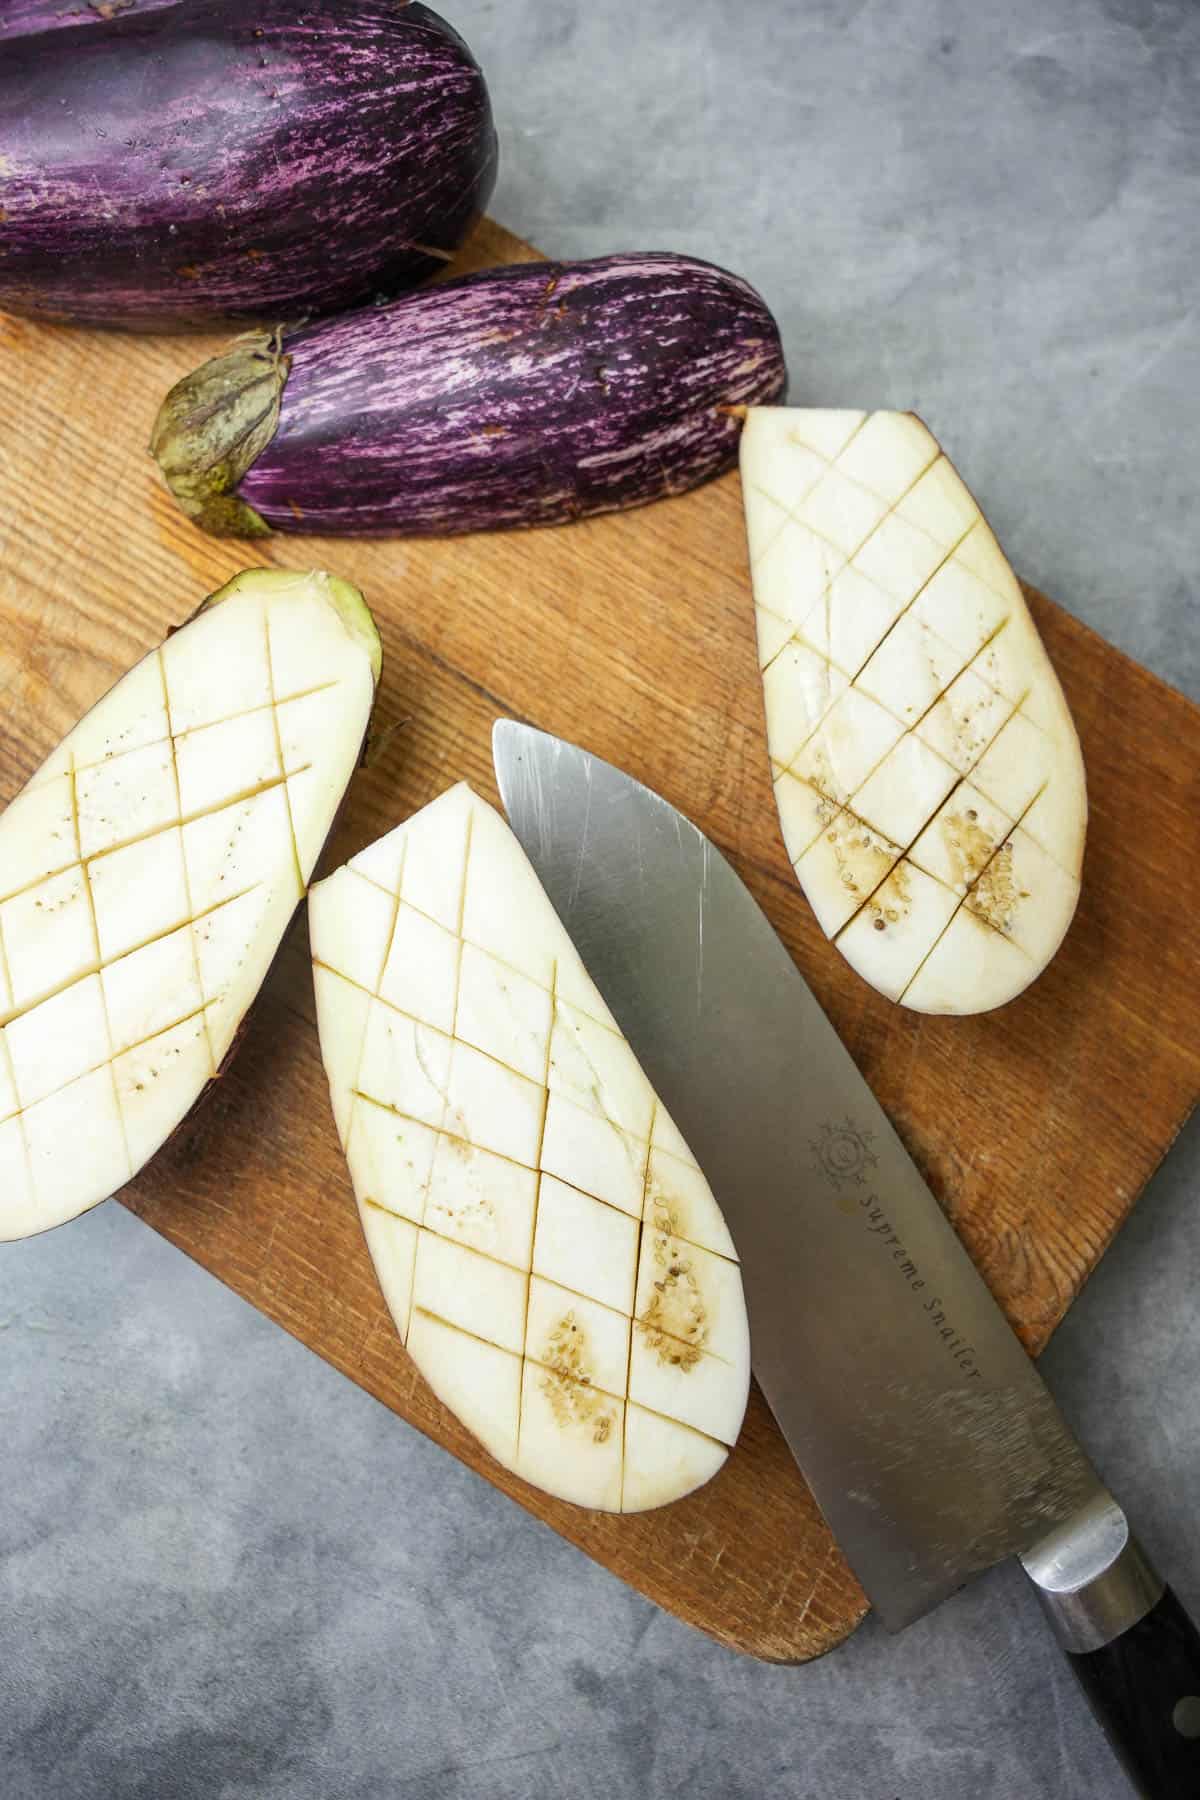 the surface of eggplant is cut into a diamond pattern with a sharp knife on a wooden cutting board.